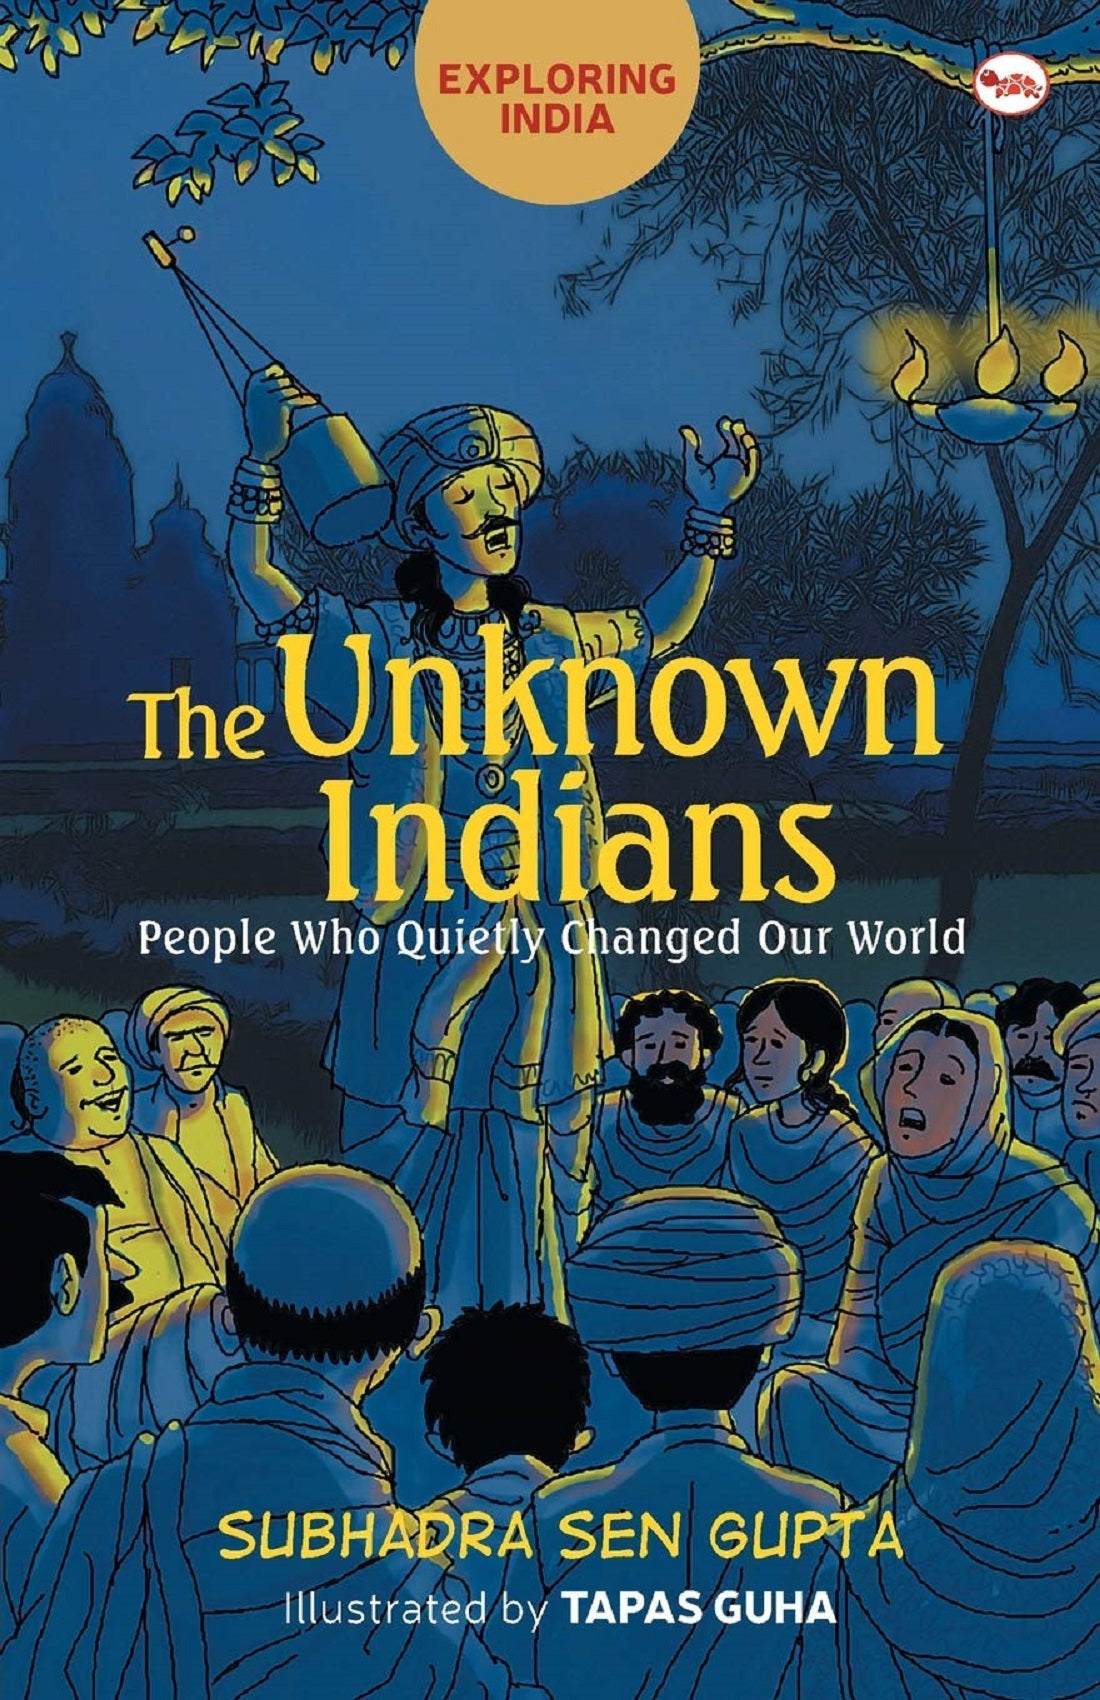 EXPLORING INDIA THE UNKNOWN INDIANS